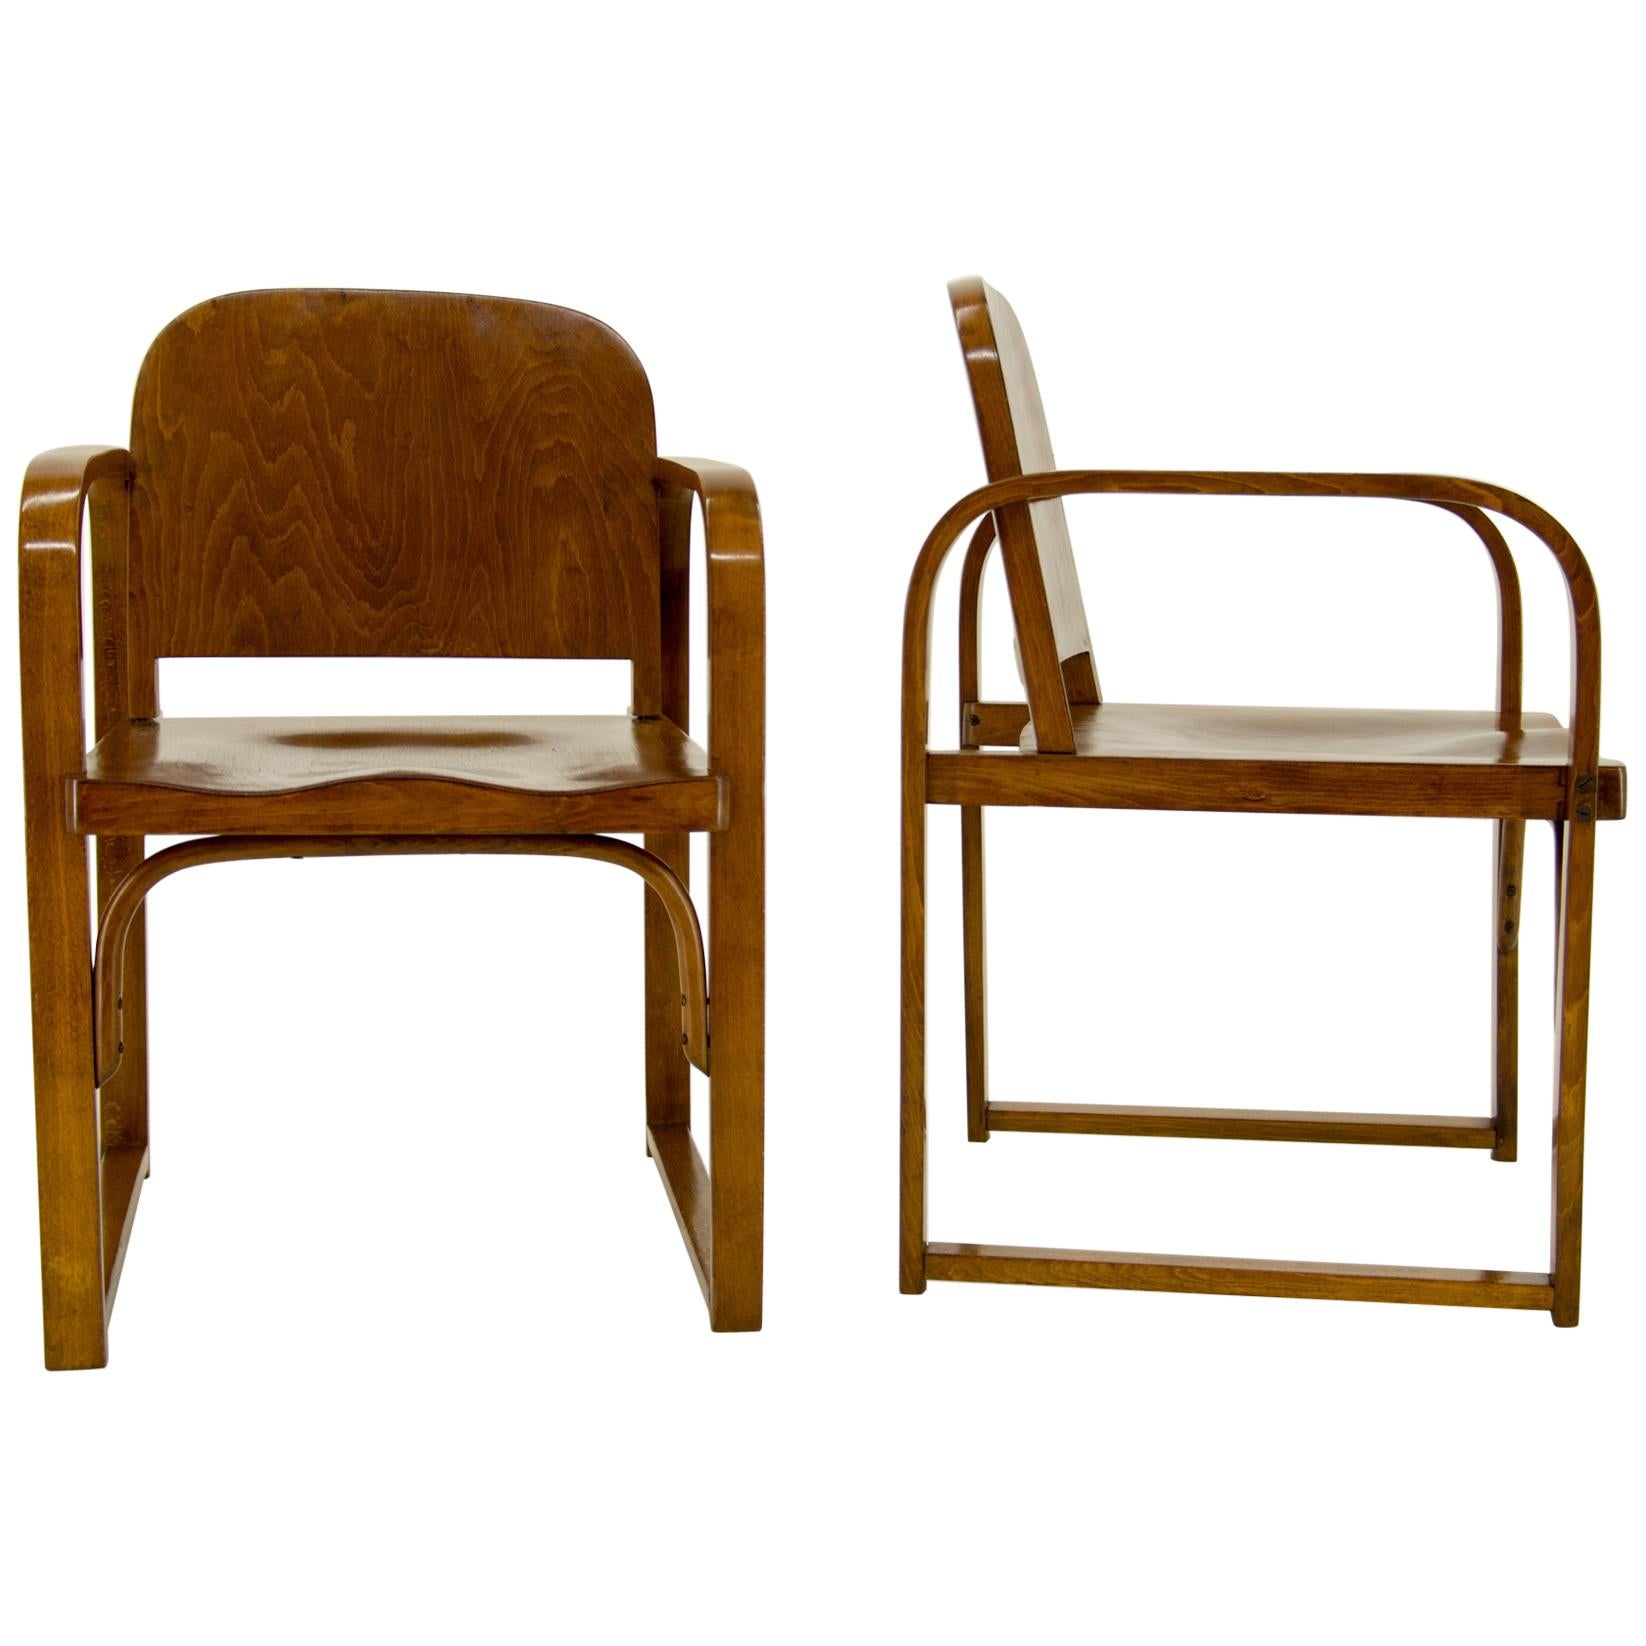 Tatra Armchairs, Model A 745 F, 1930s, Set of Two